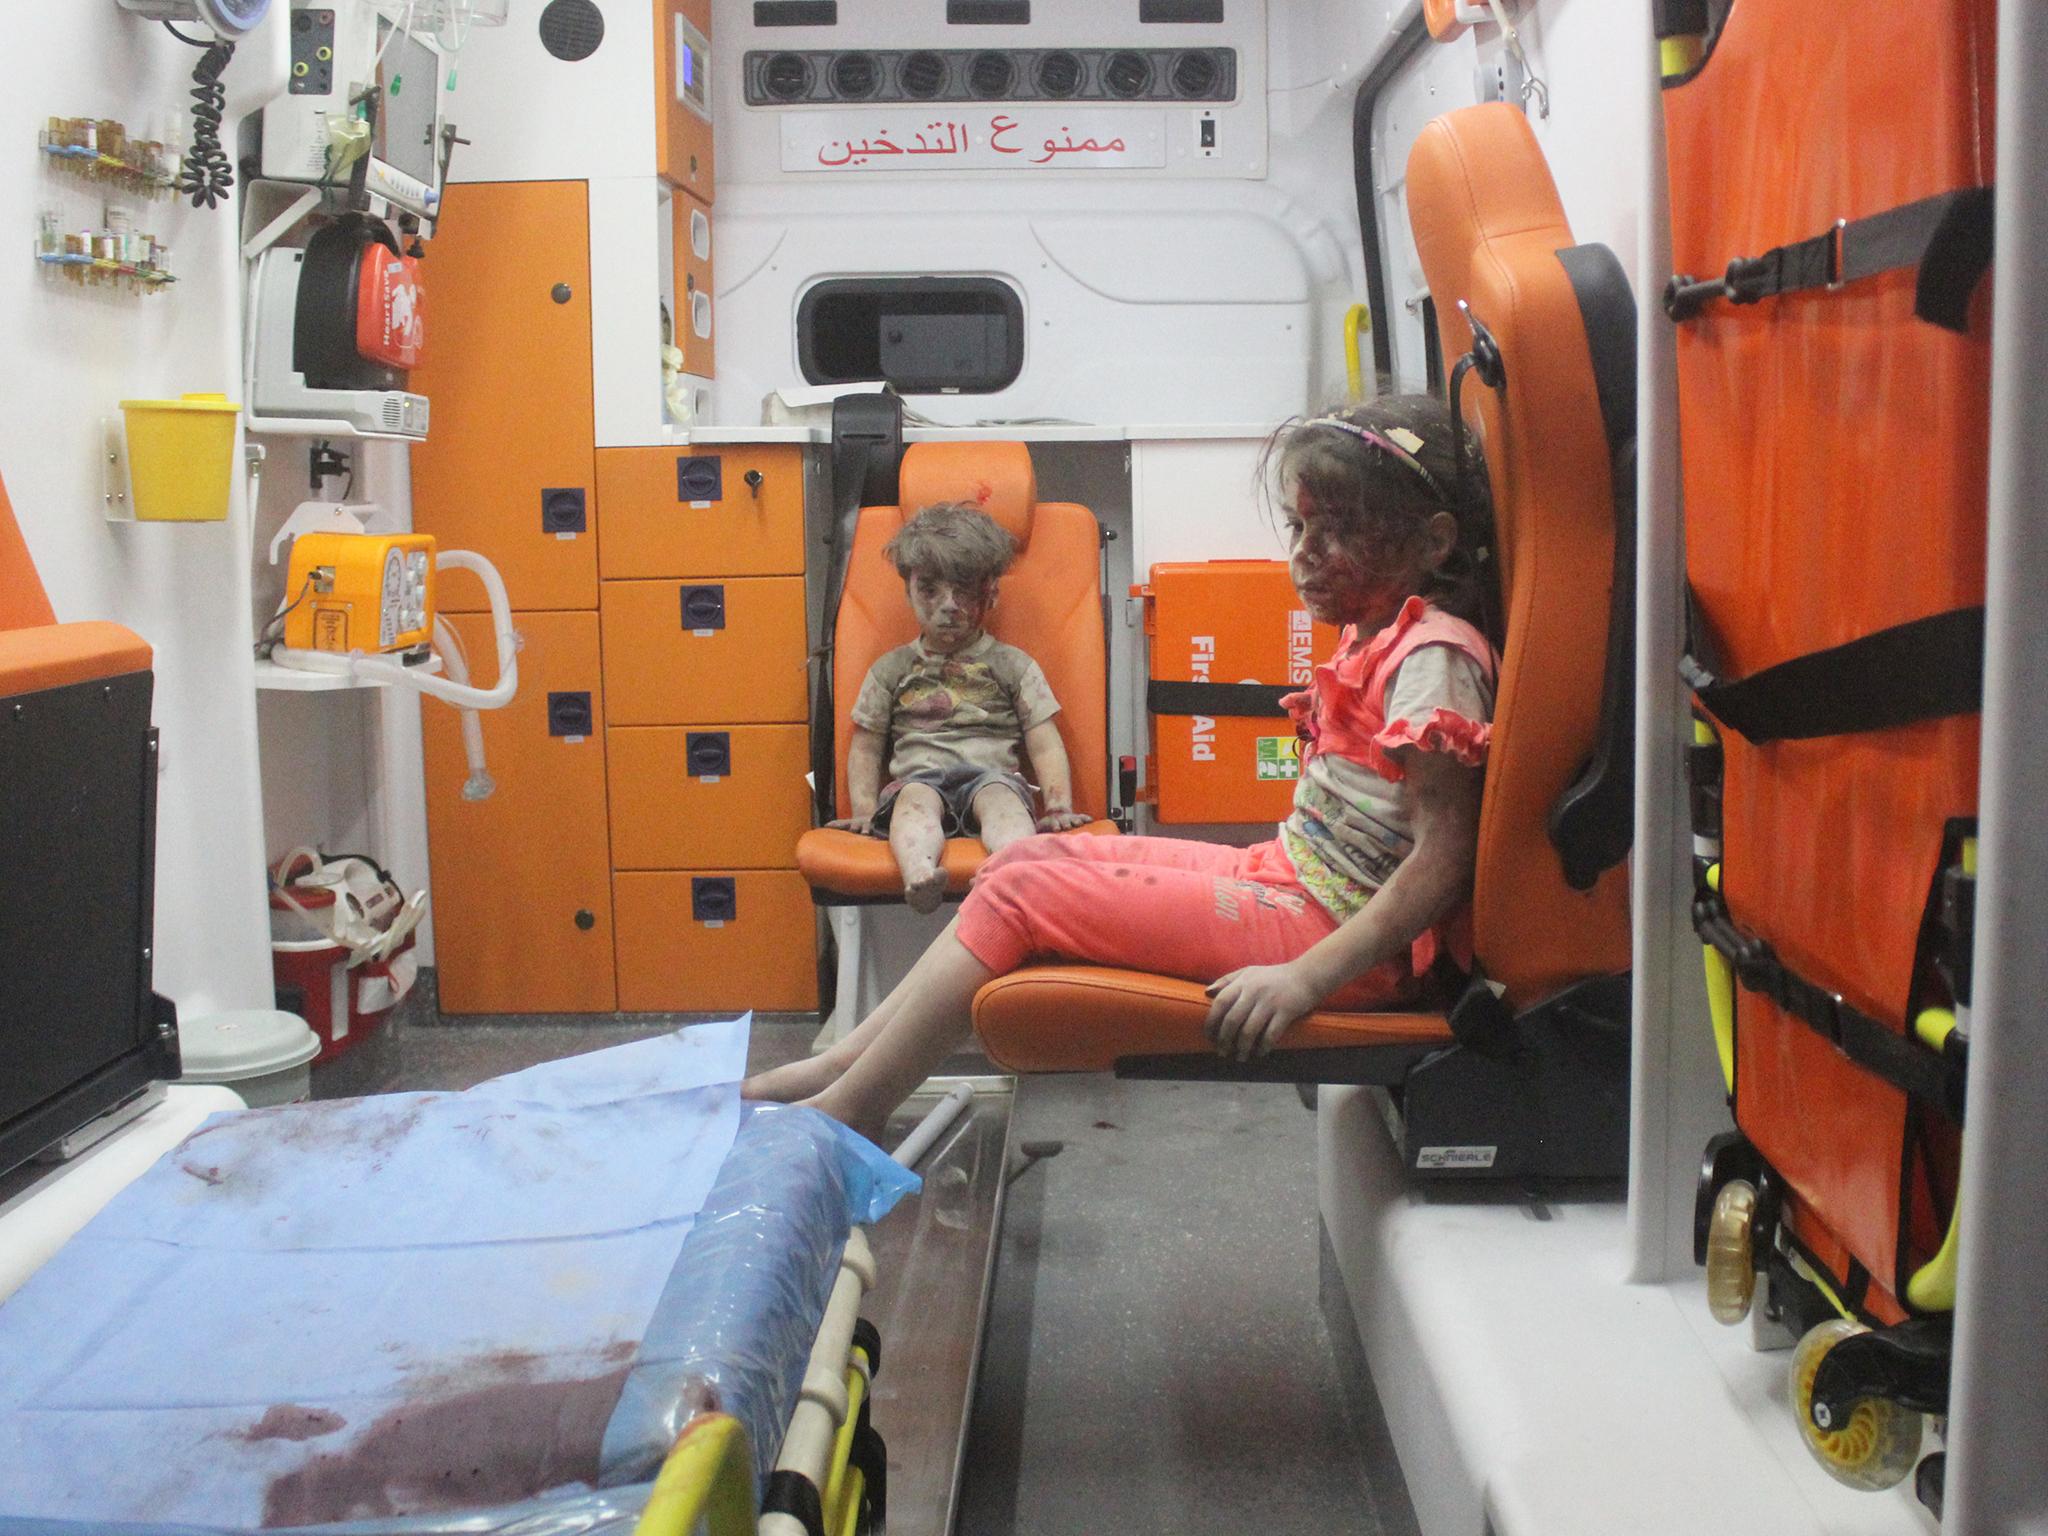 Five-year-old Omran Daqneesh, with bloodied face, sits with his sister inside an ambulance after an airstrike in Aleppo